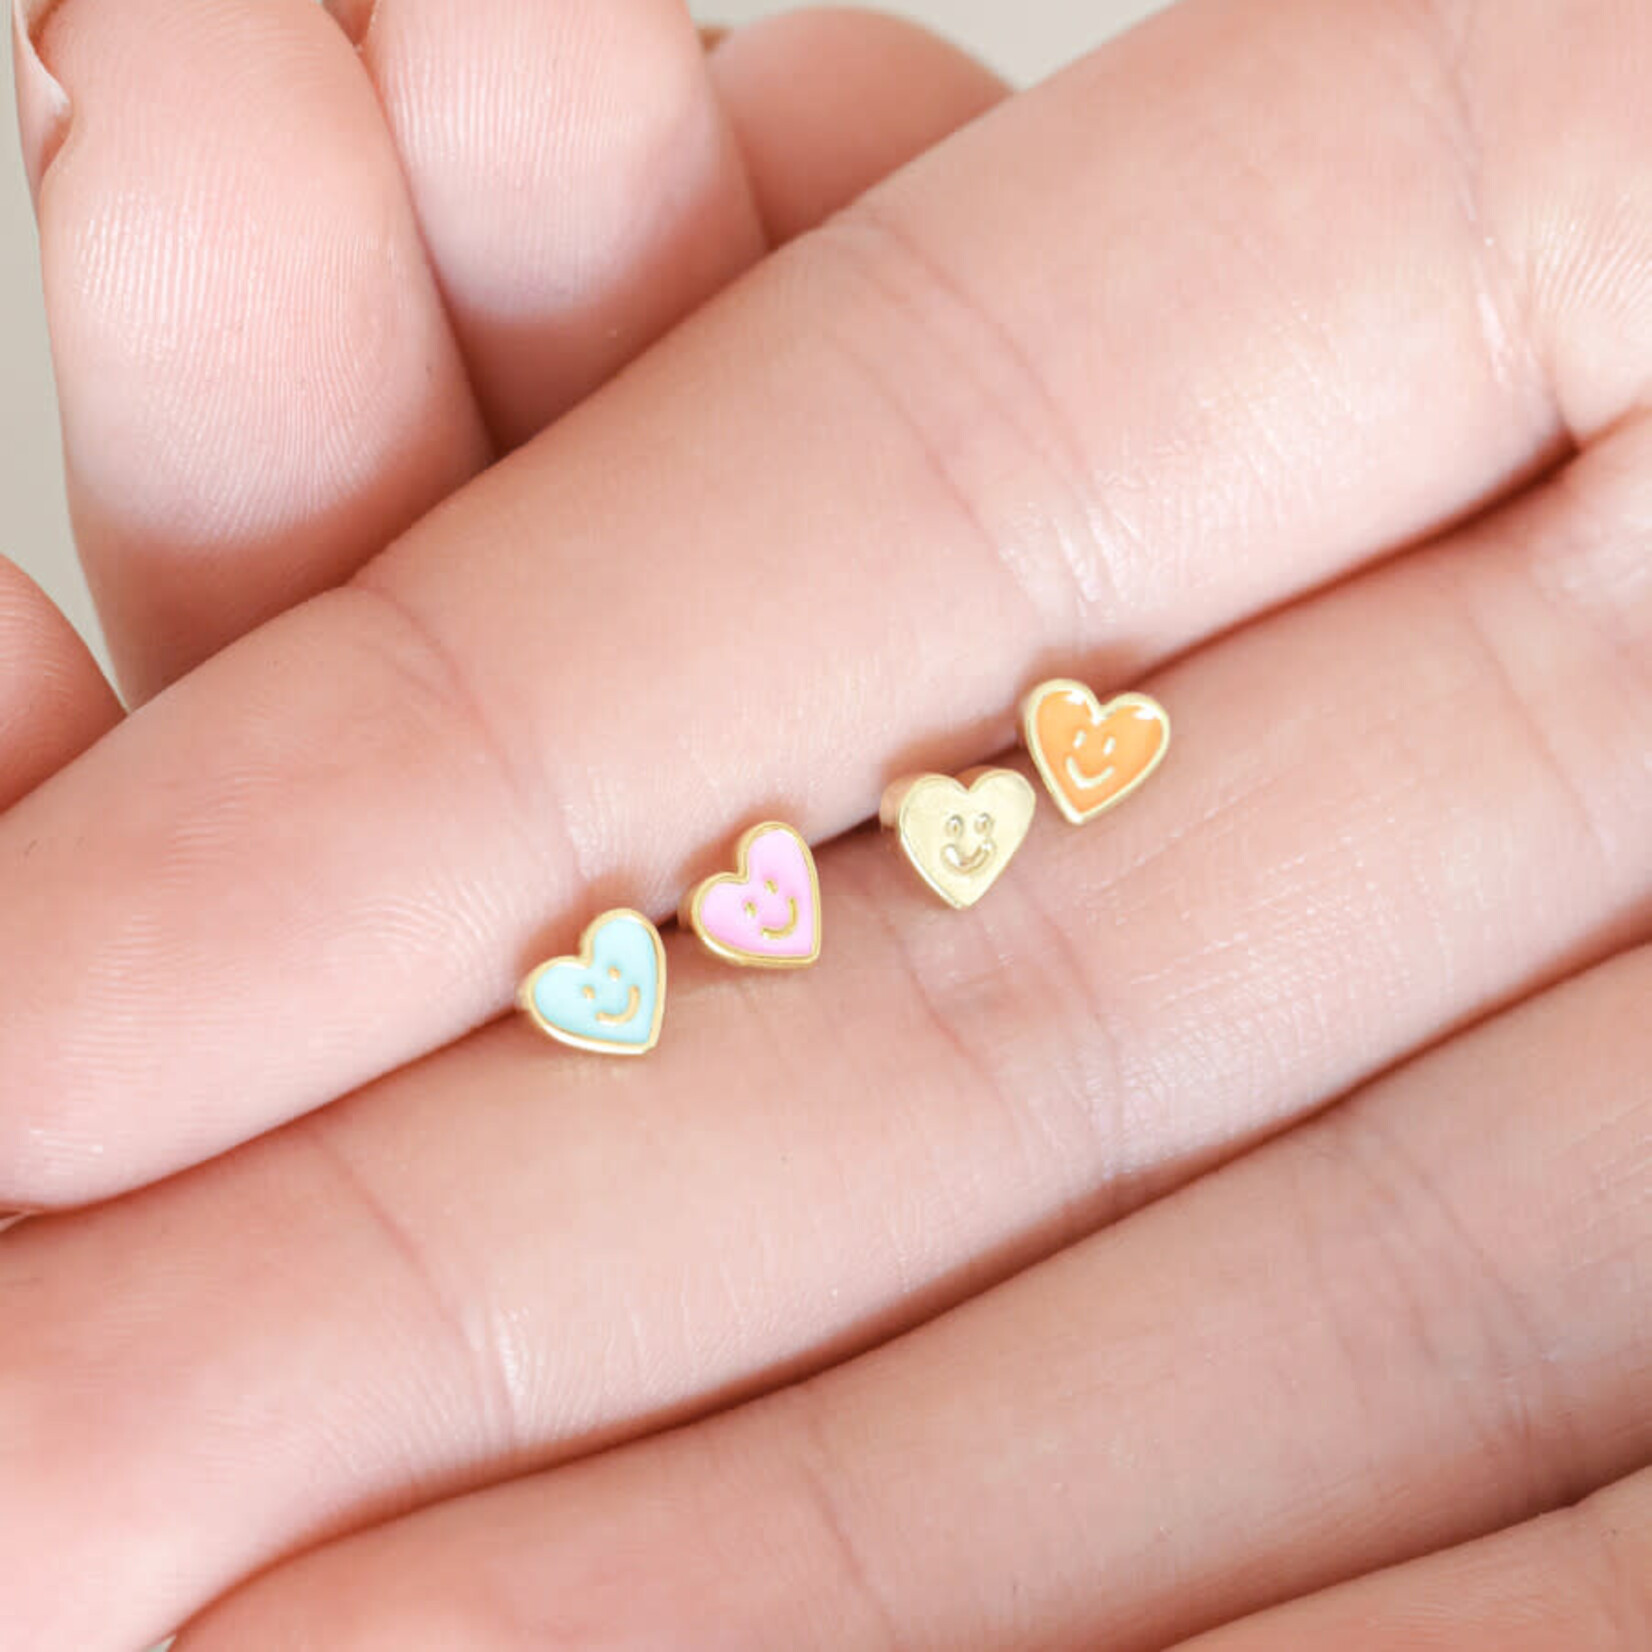 Lisa Angel Set of 4 Mismatched Heart Face Stud Earrings in Gold